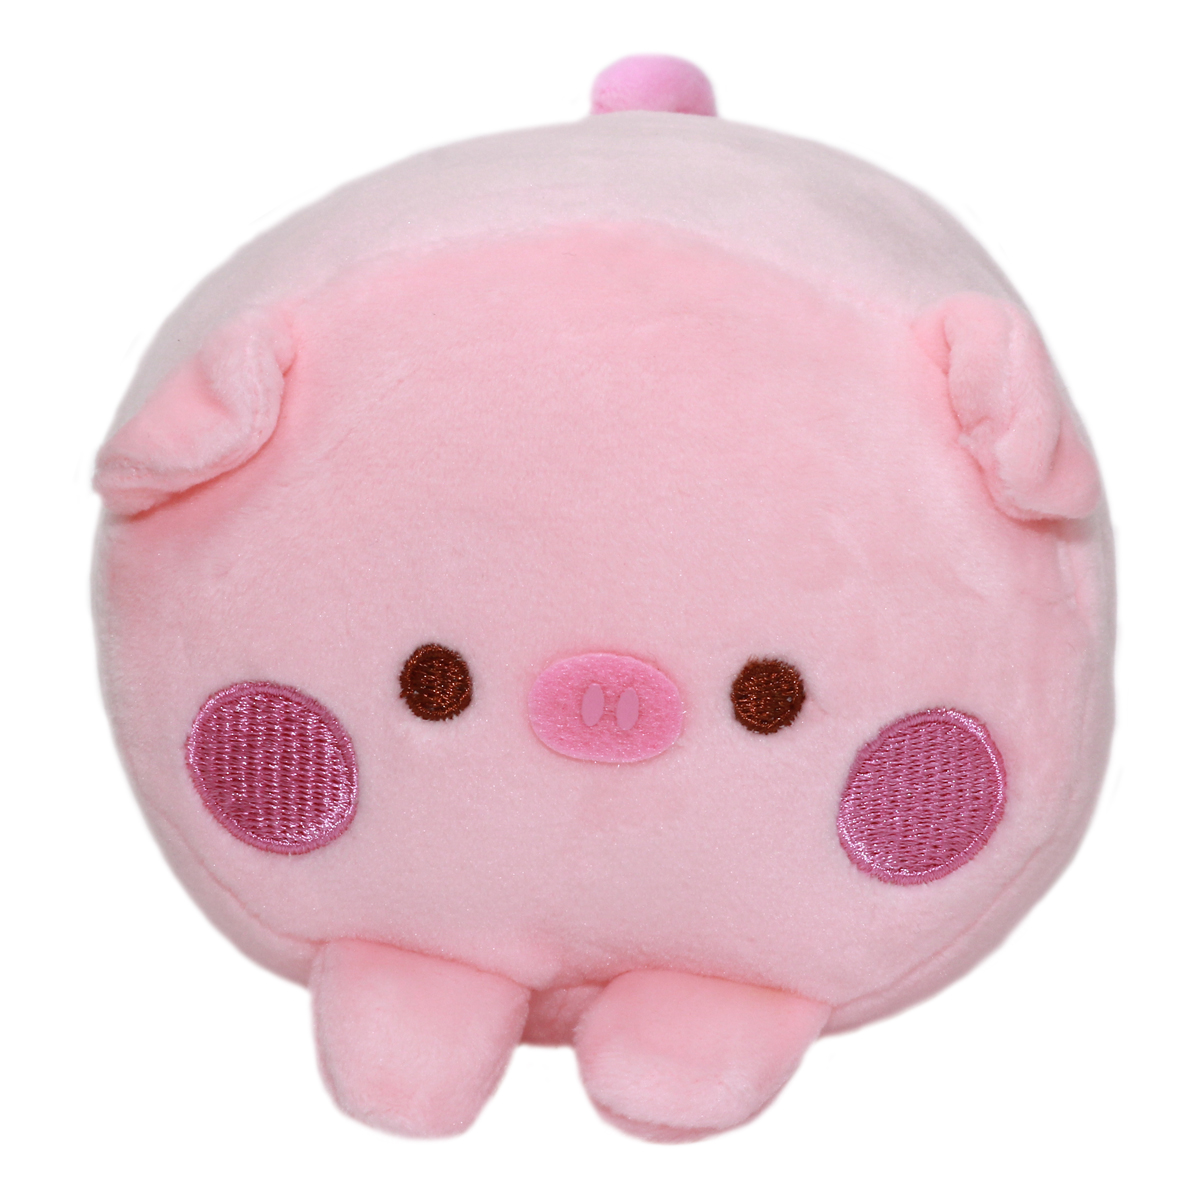 Soft & Squishy Big Bad Wolf Plush Collection Pig Pink 6 Inches